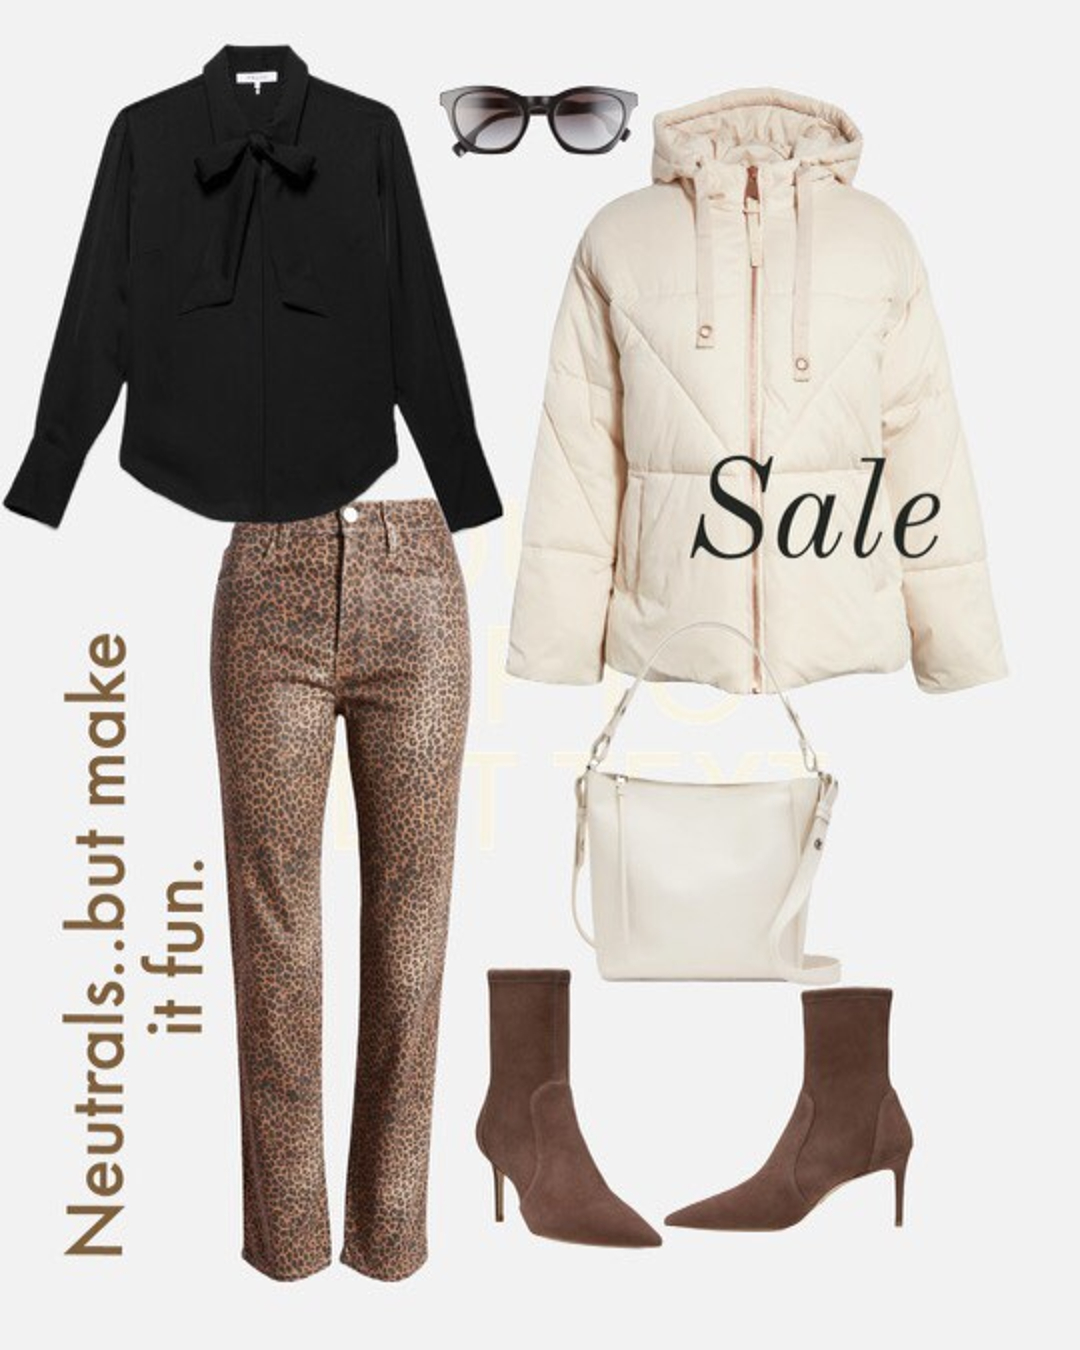 Nordstrom Half-Yearly Sale December 2022 Styling Ideas